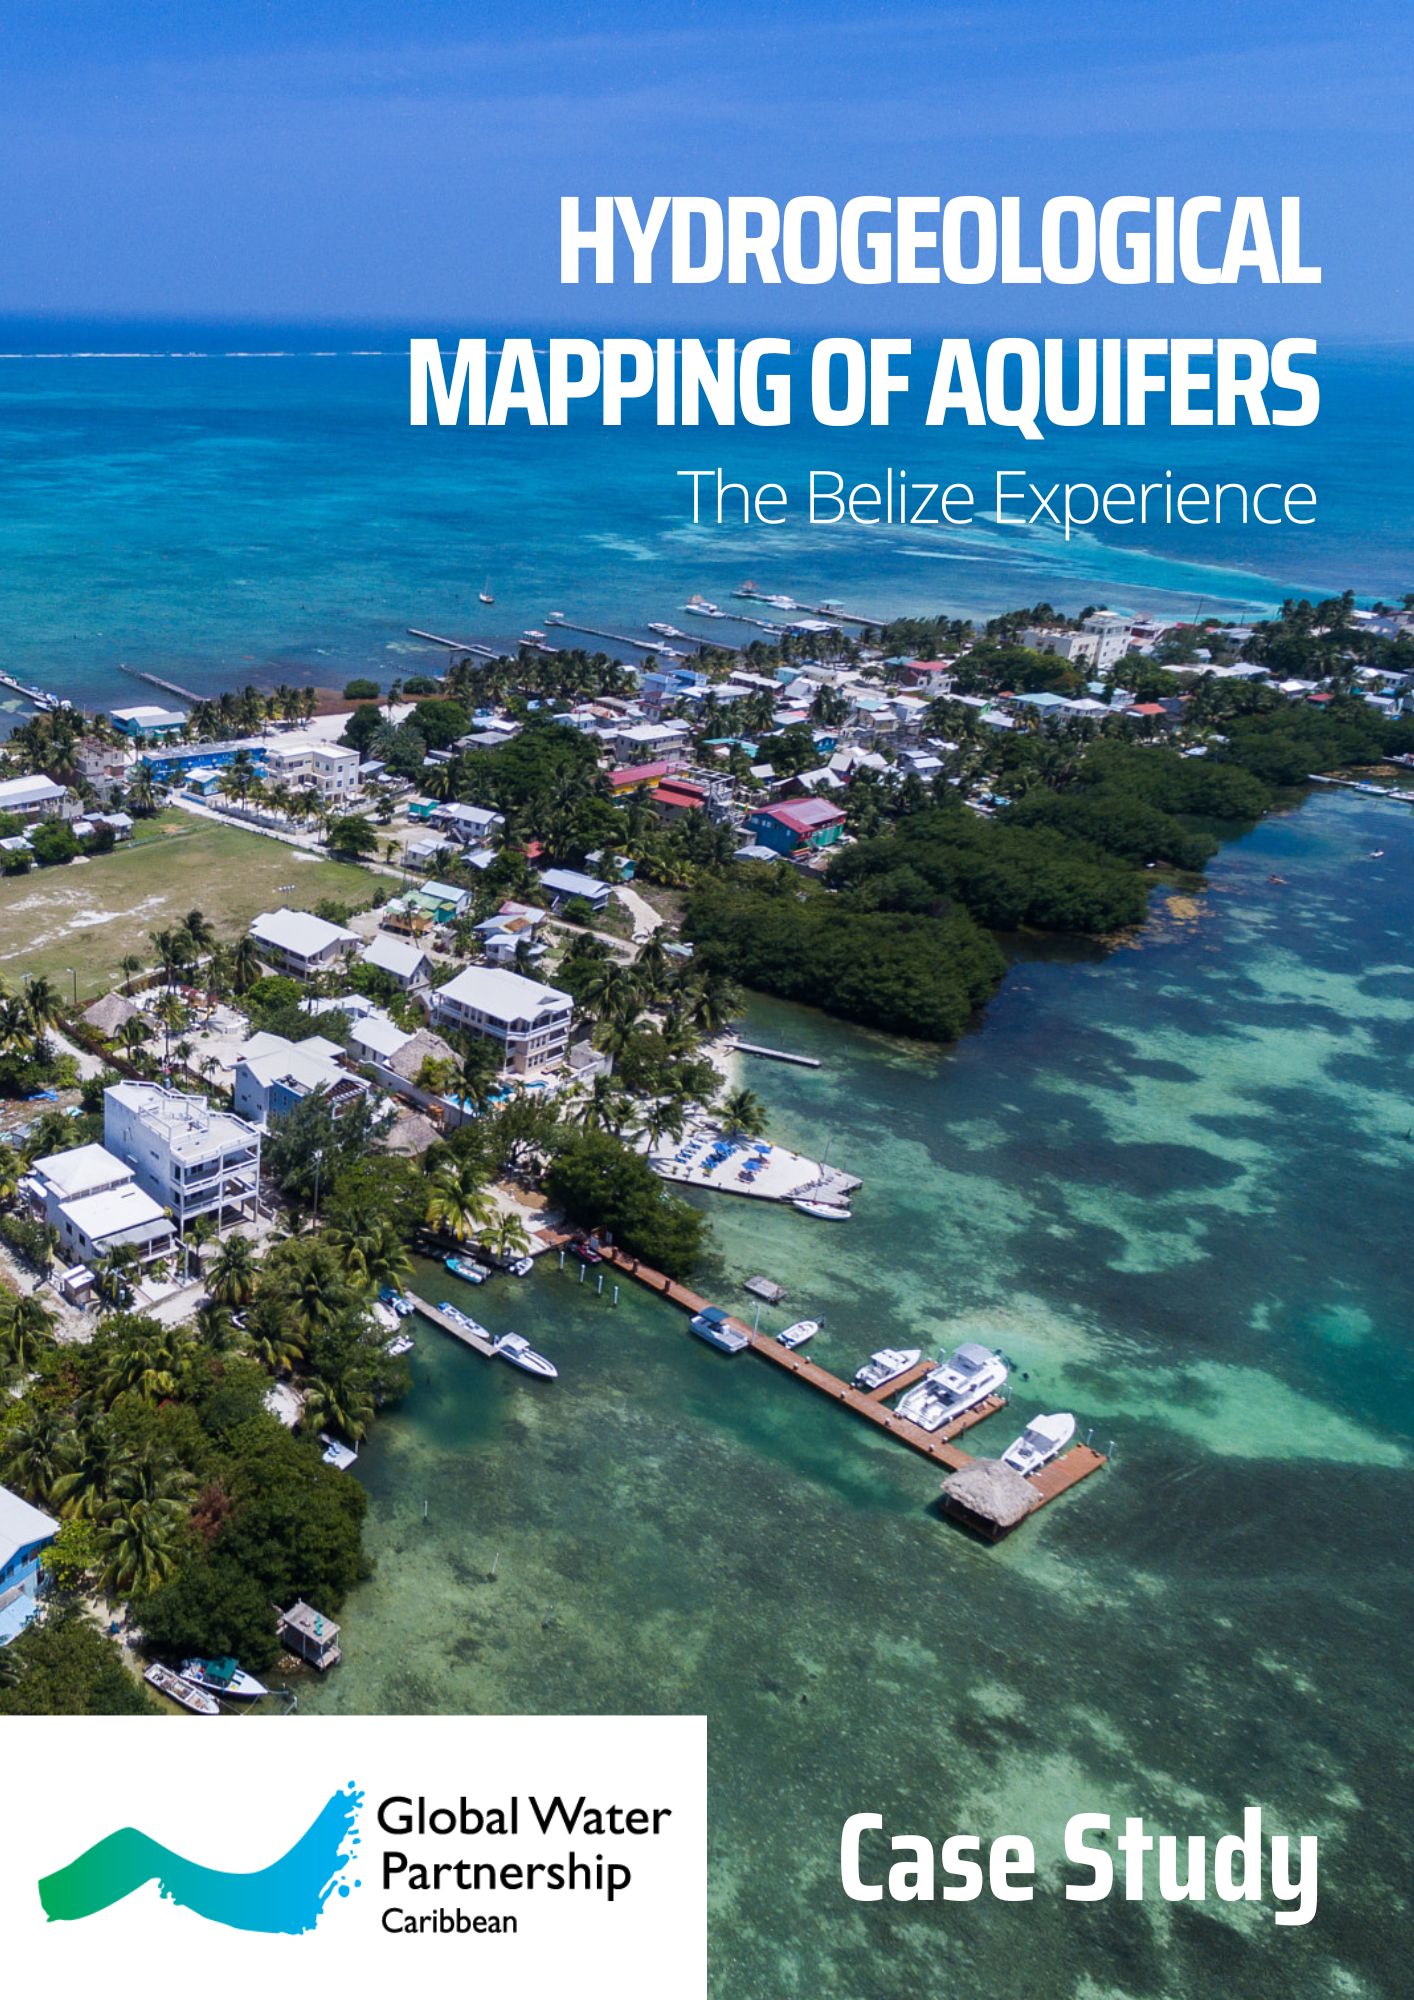 Image of Belize Coastline with title of Case Study